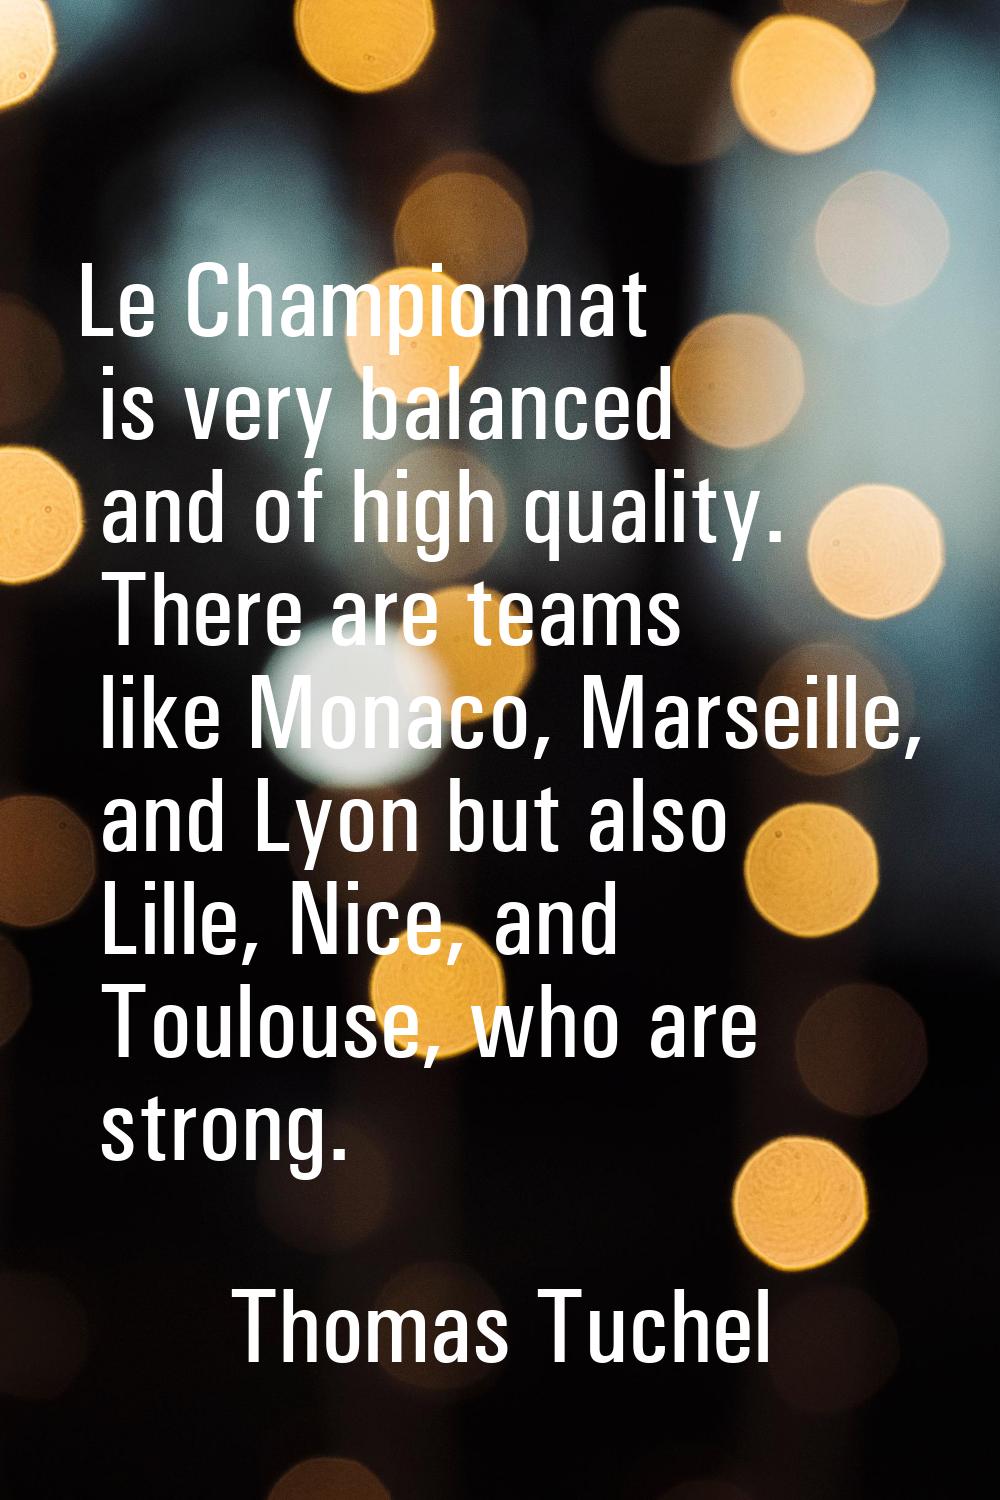 Le Championnat is very balanced and of high quality. There are teams like Monaco, Marseille, and Ly